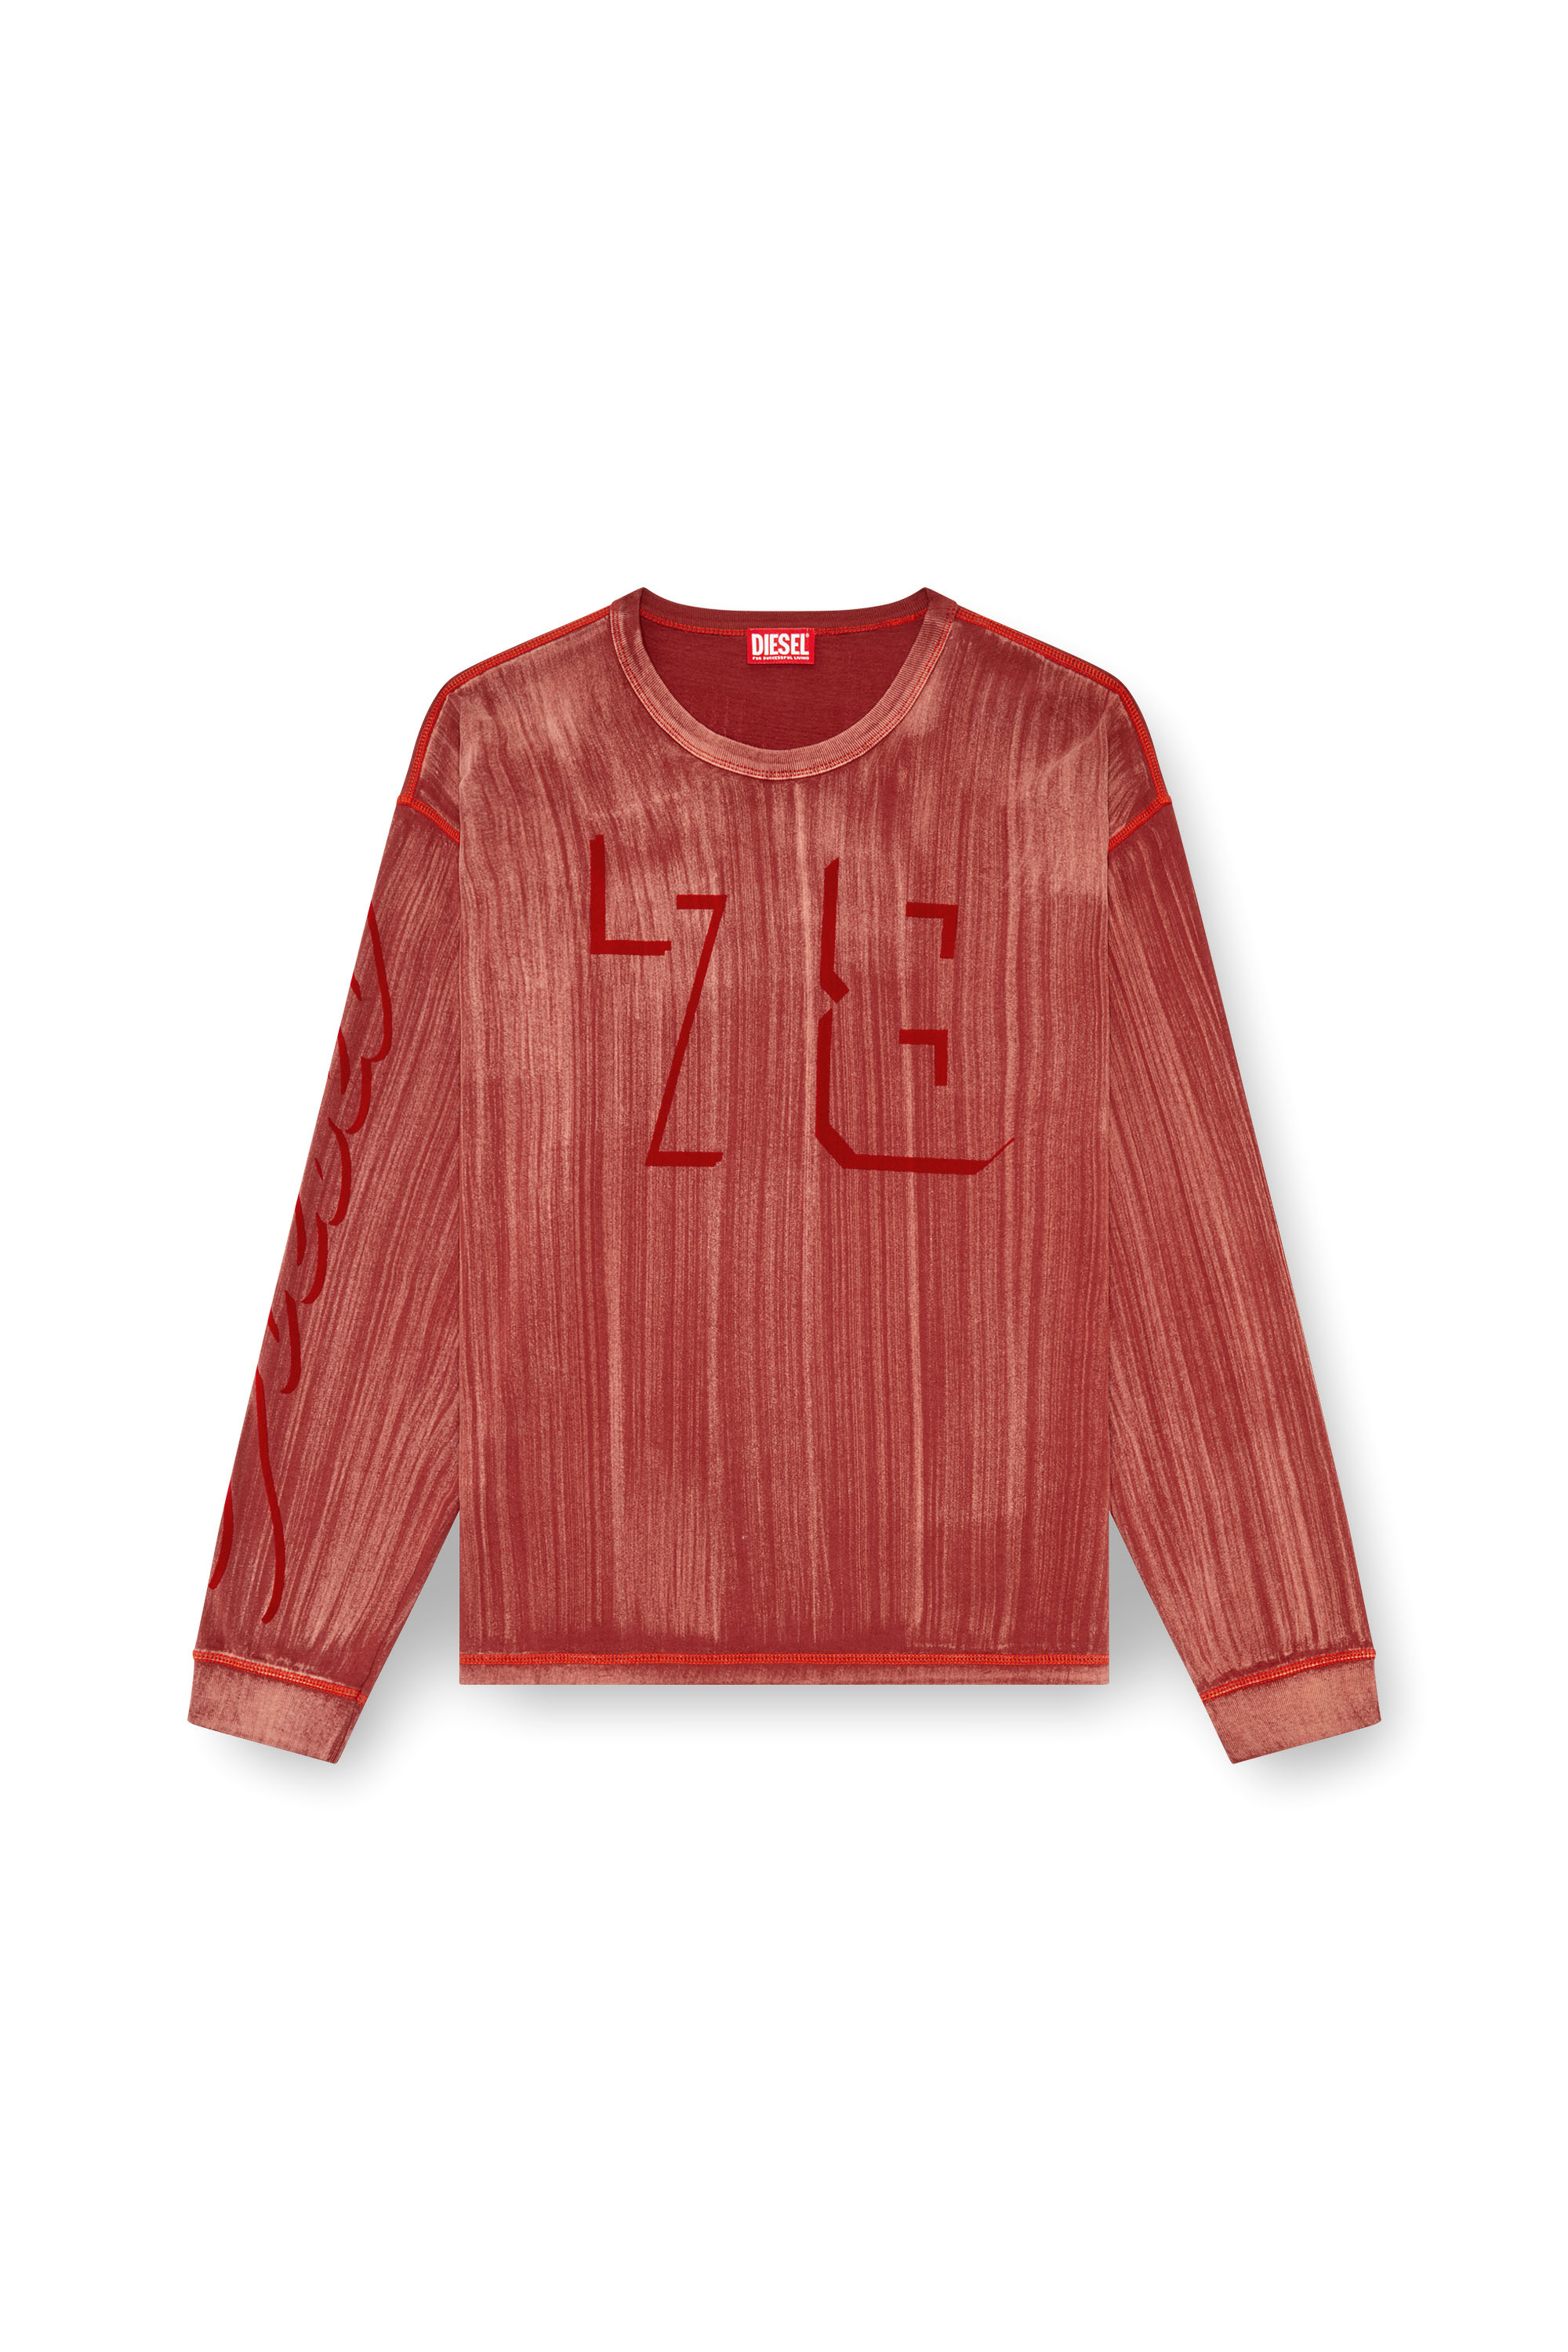 Diesel - T-BOXT-LS-Q2, Uomo T-shirt a maniche lunghe con pennellate in Rosso - Image 3